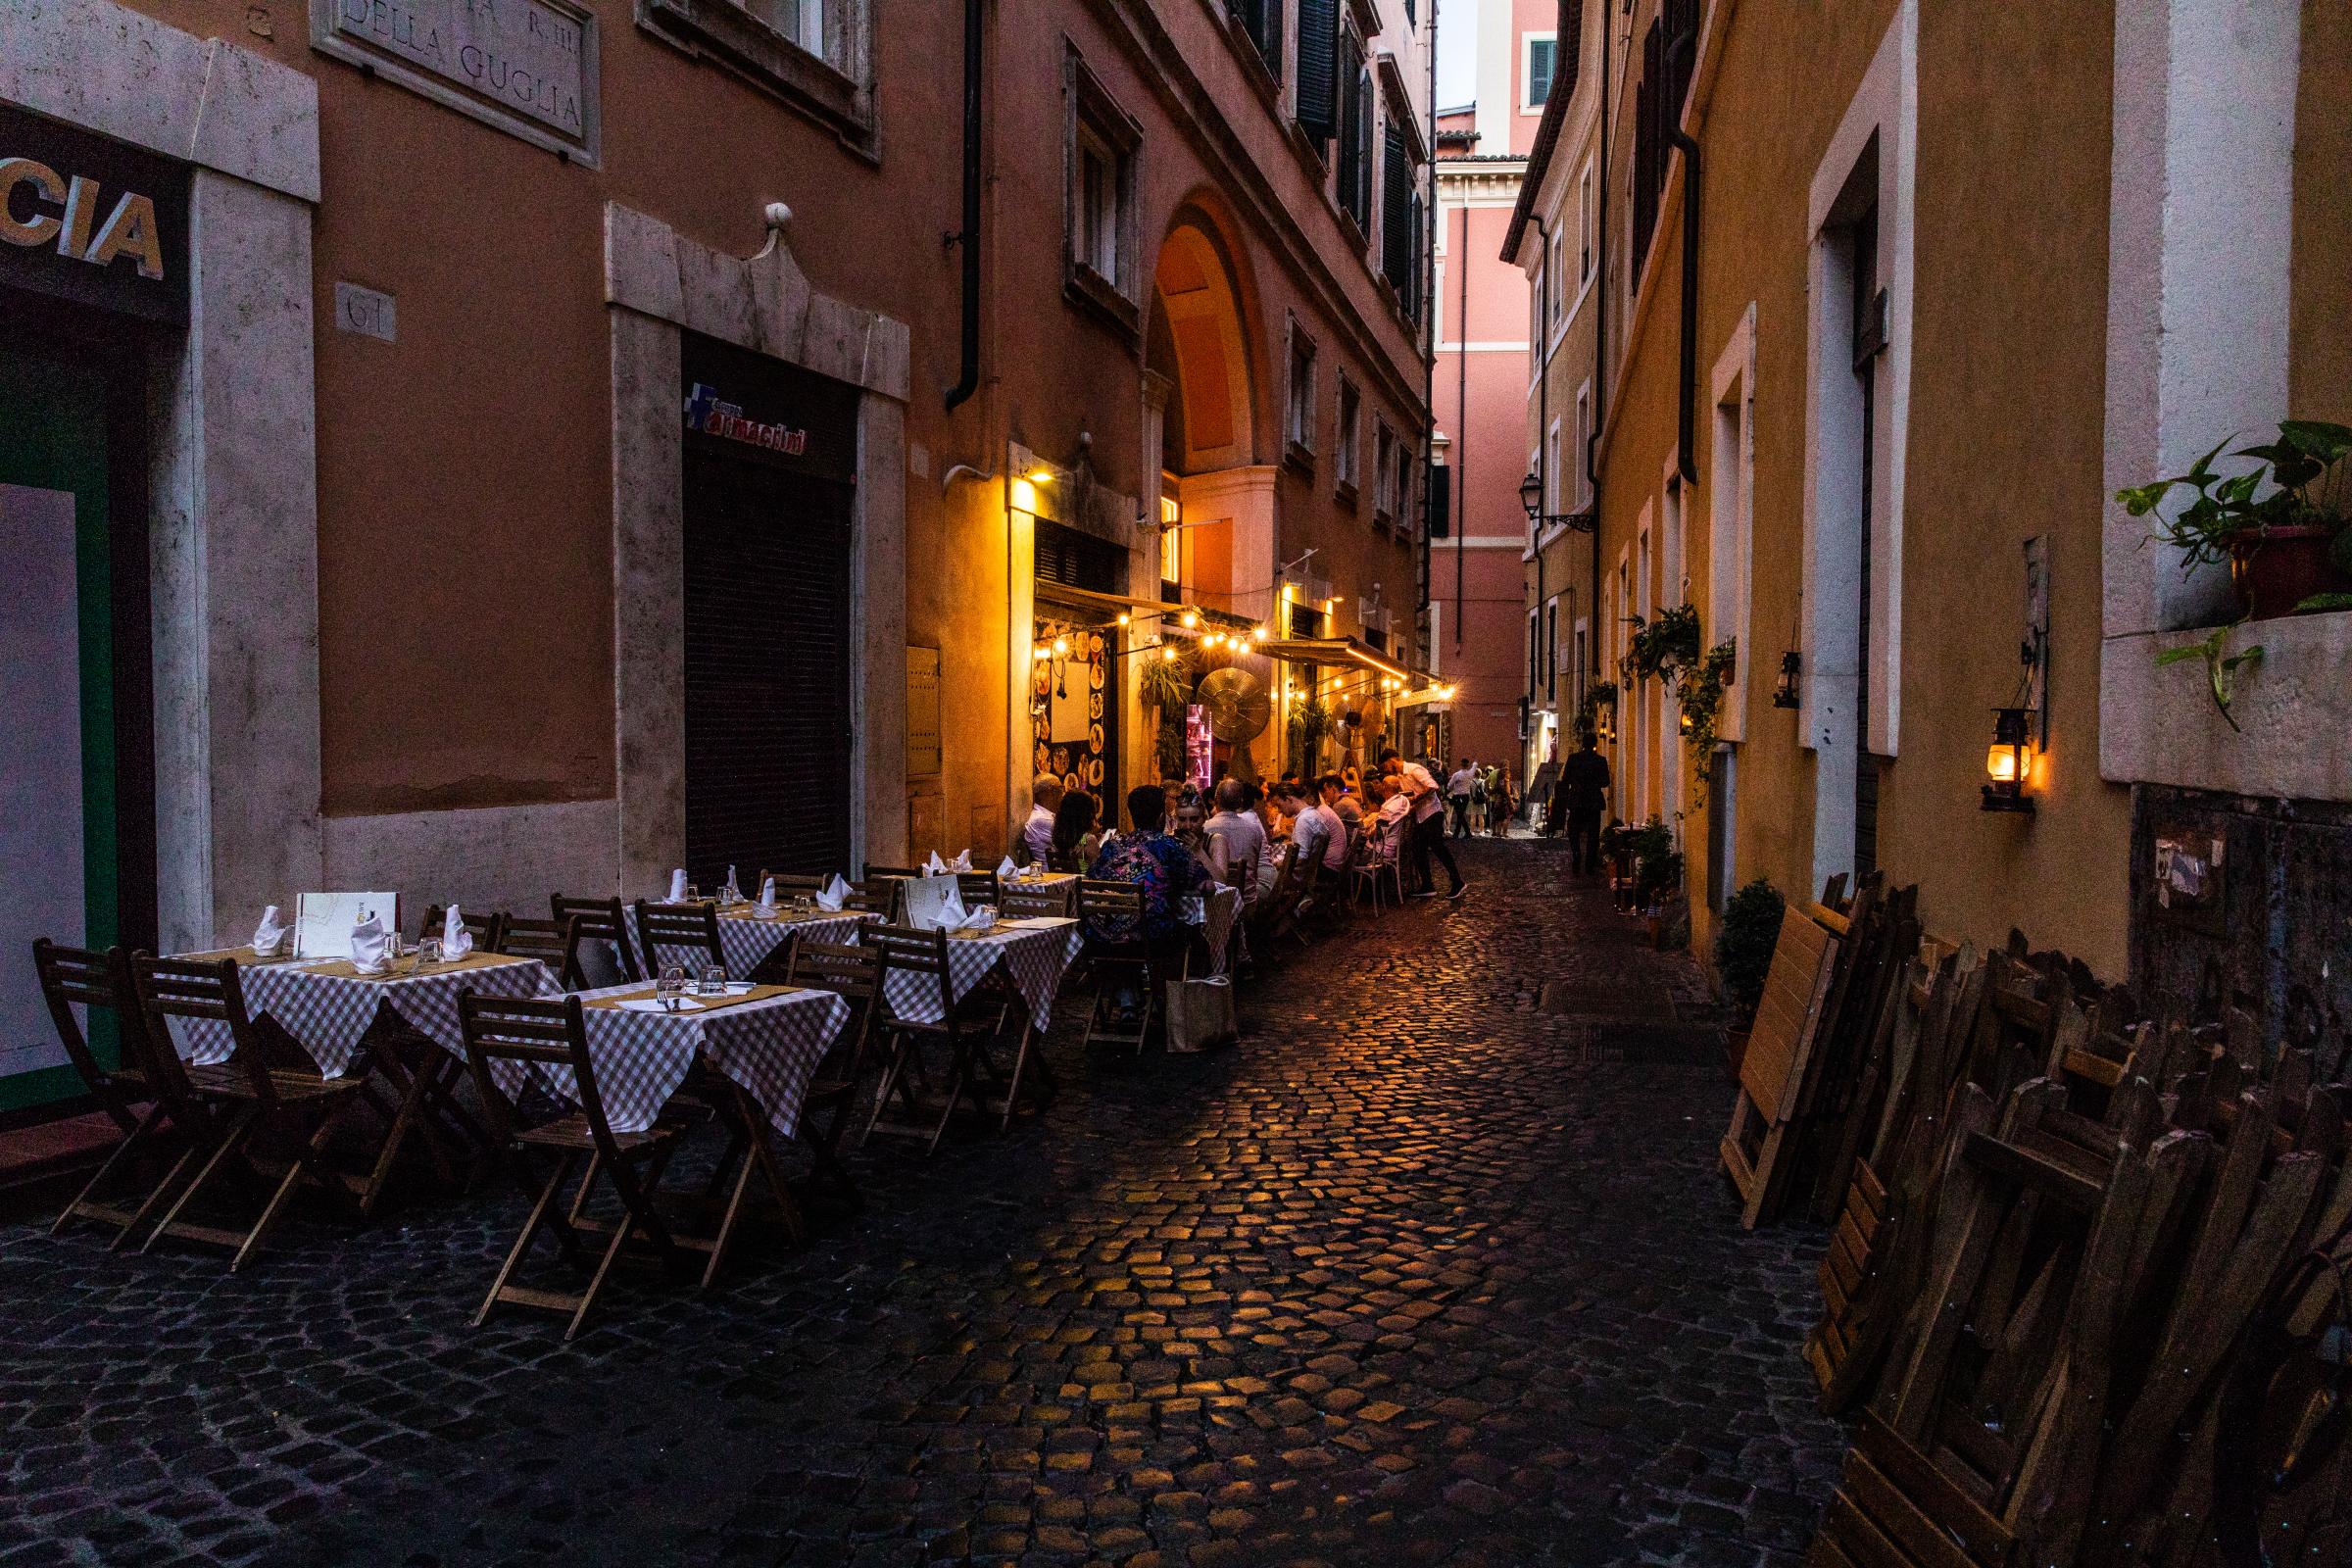 That Bad Boy Rome - A First-timer's Perspective - As the sun sets, lights come on for the many restaurants scattered along the side streets of Rome.